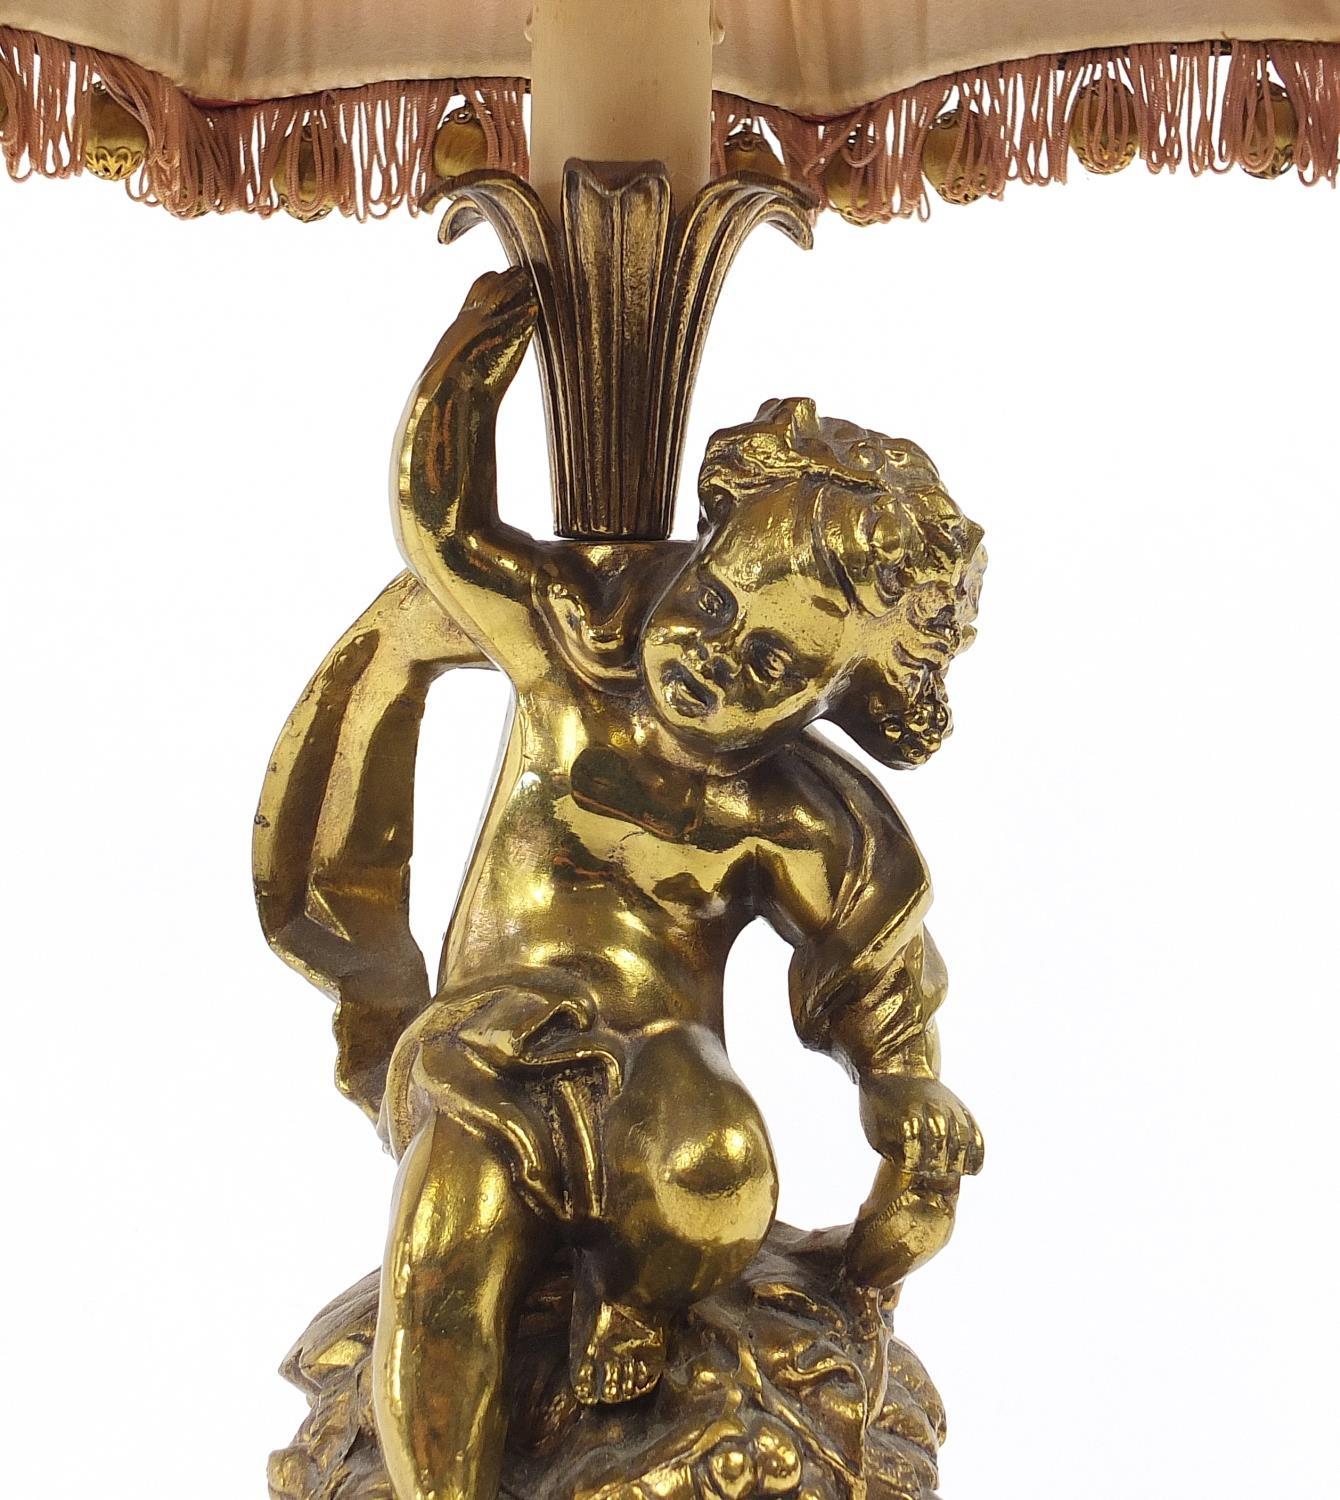 Ornate gilt metal Putti design table lamp with silk lined shade, 71cm high - Image 4 of 8